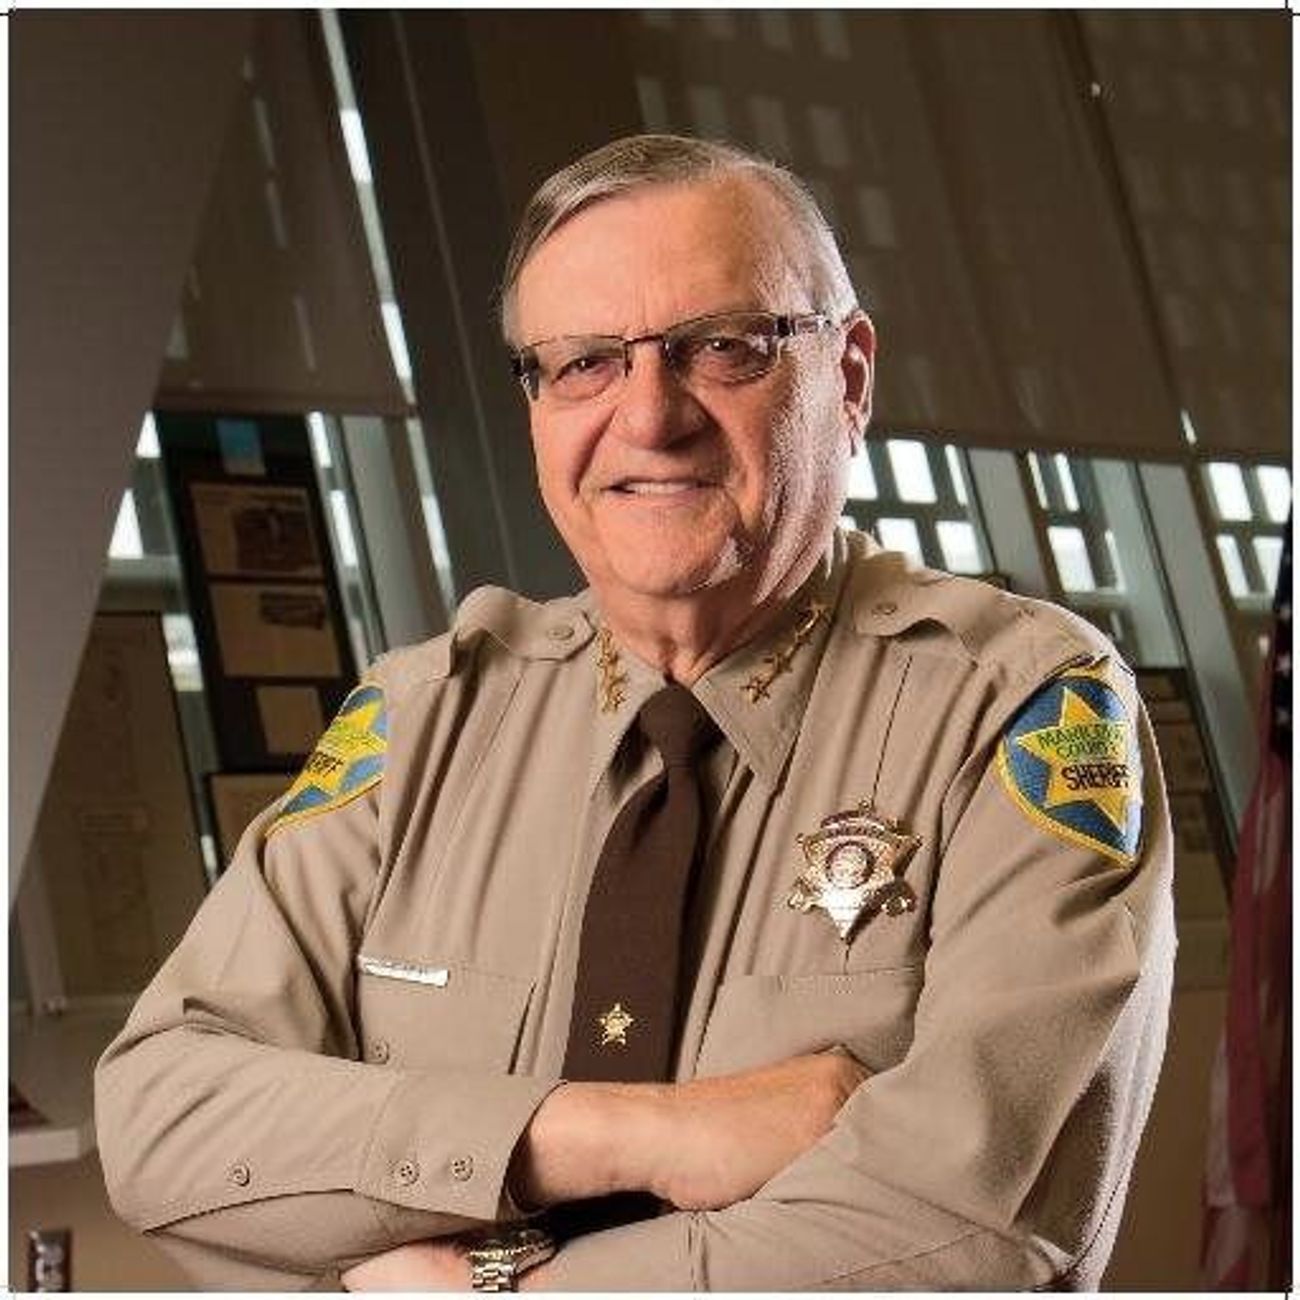 America’s Sheriff- An Interview with Sheriff Joe Arpaio- Episode 463